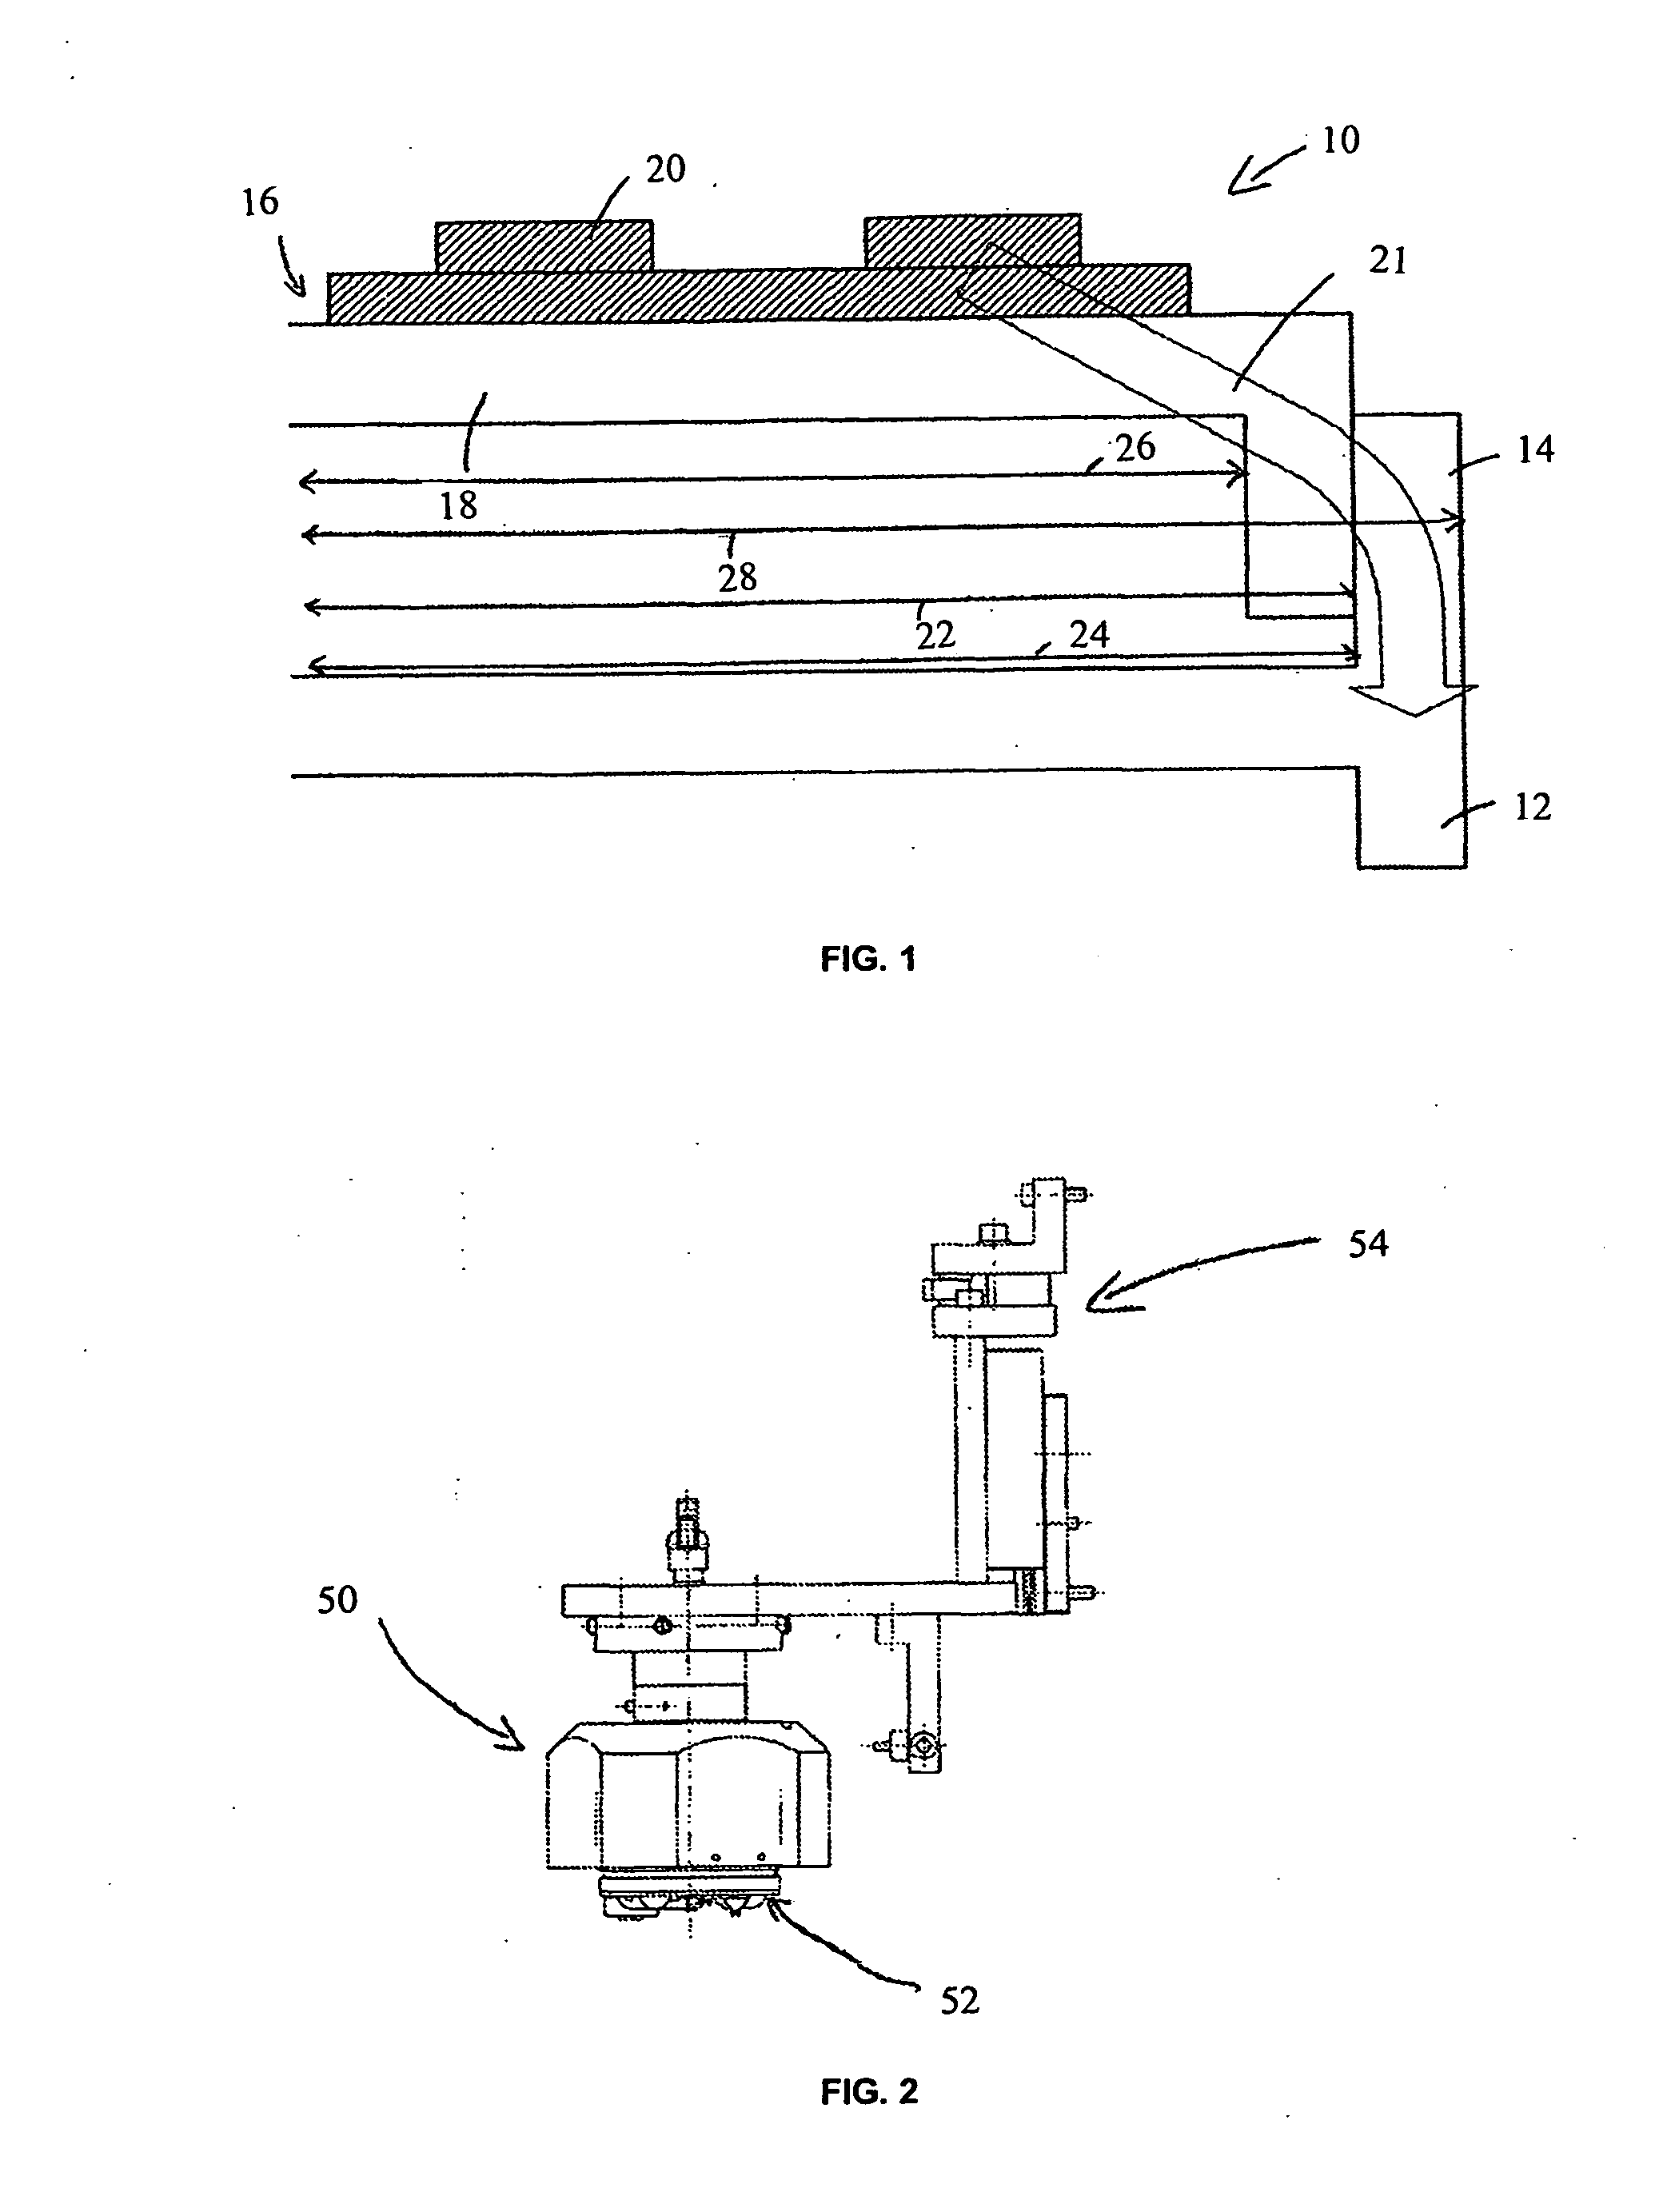 Power unit for an electrical steering system